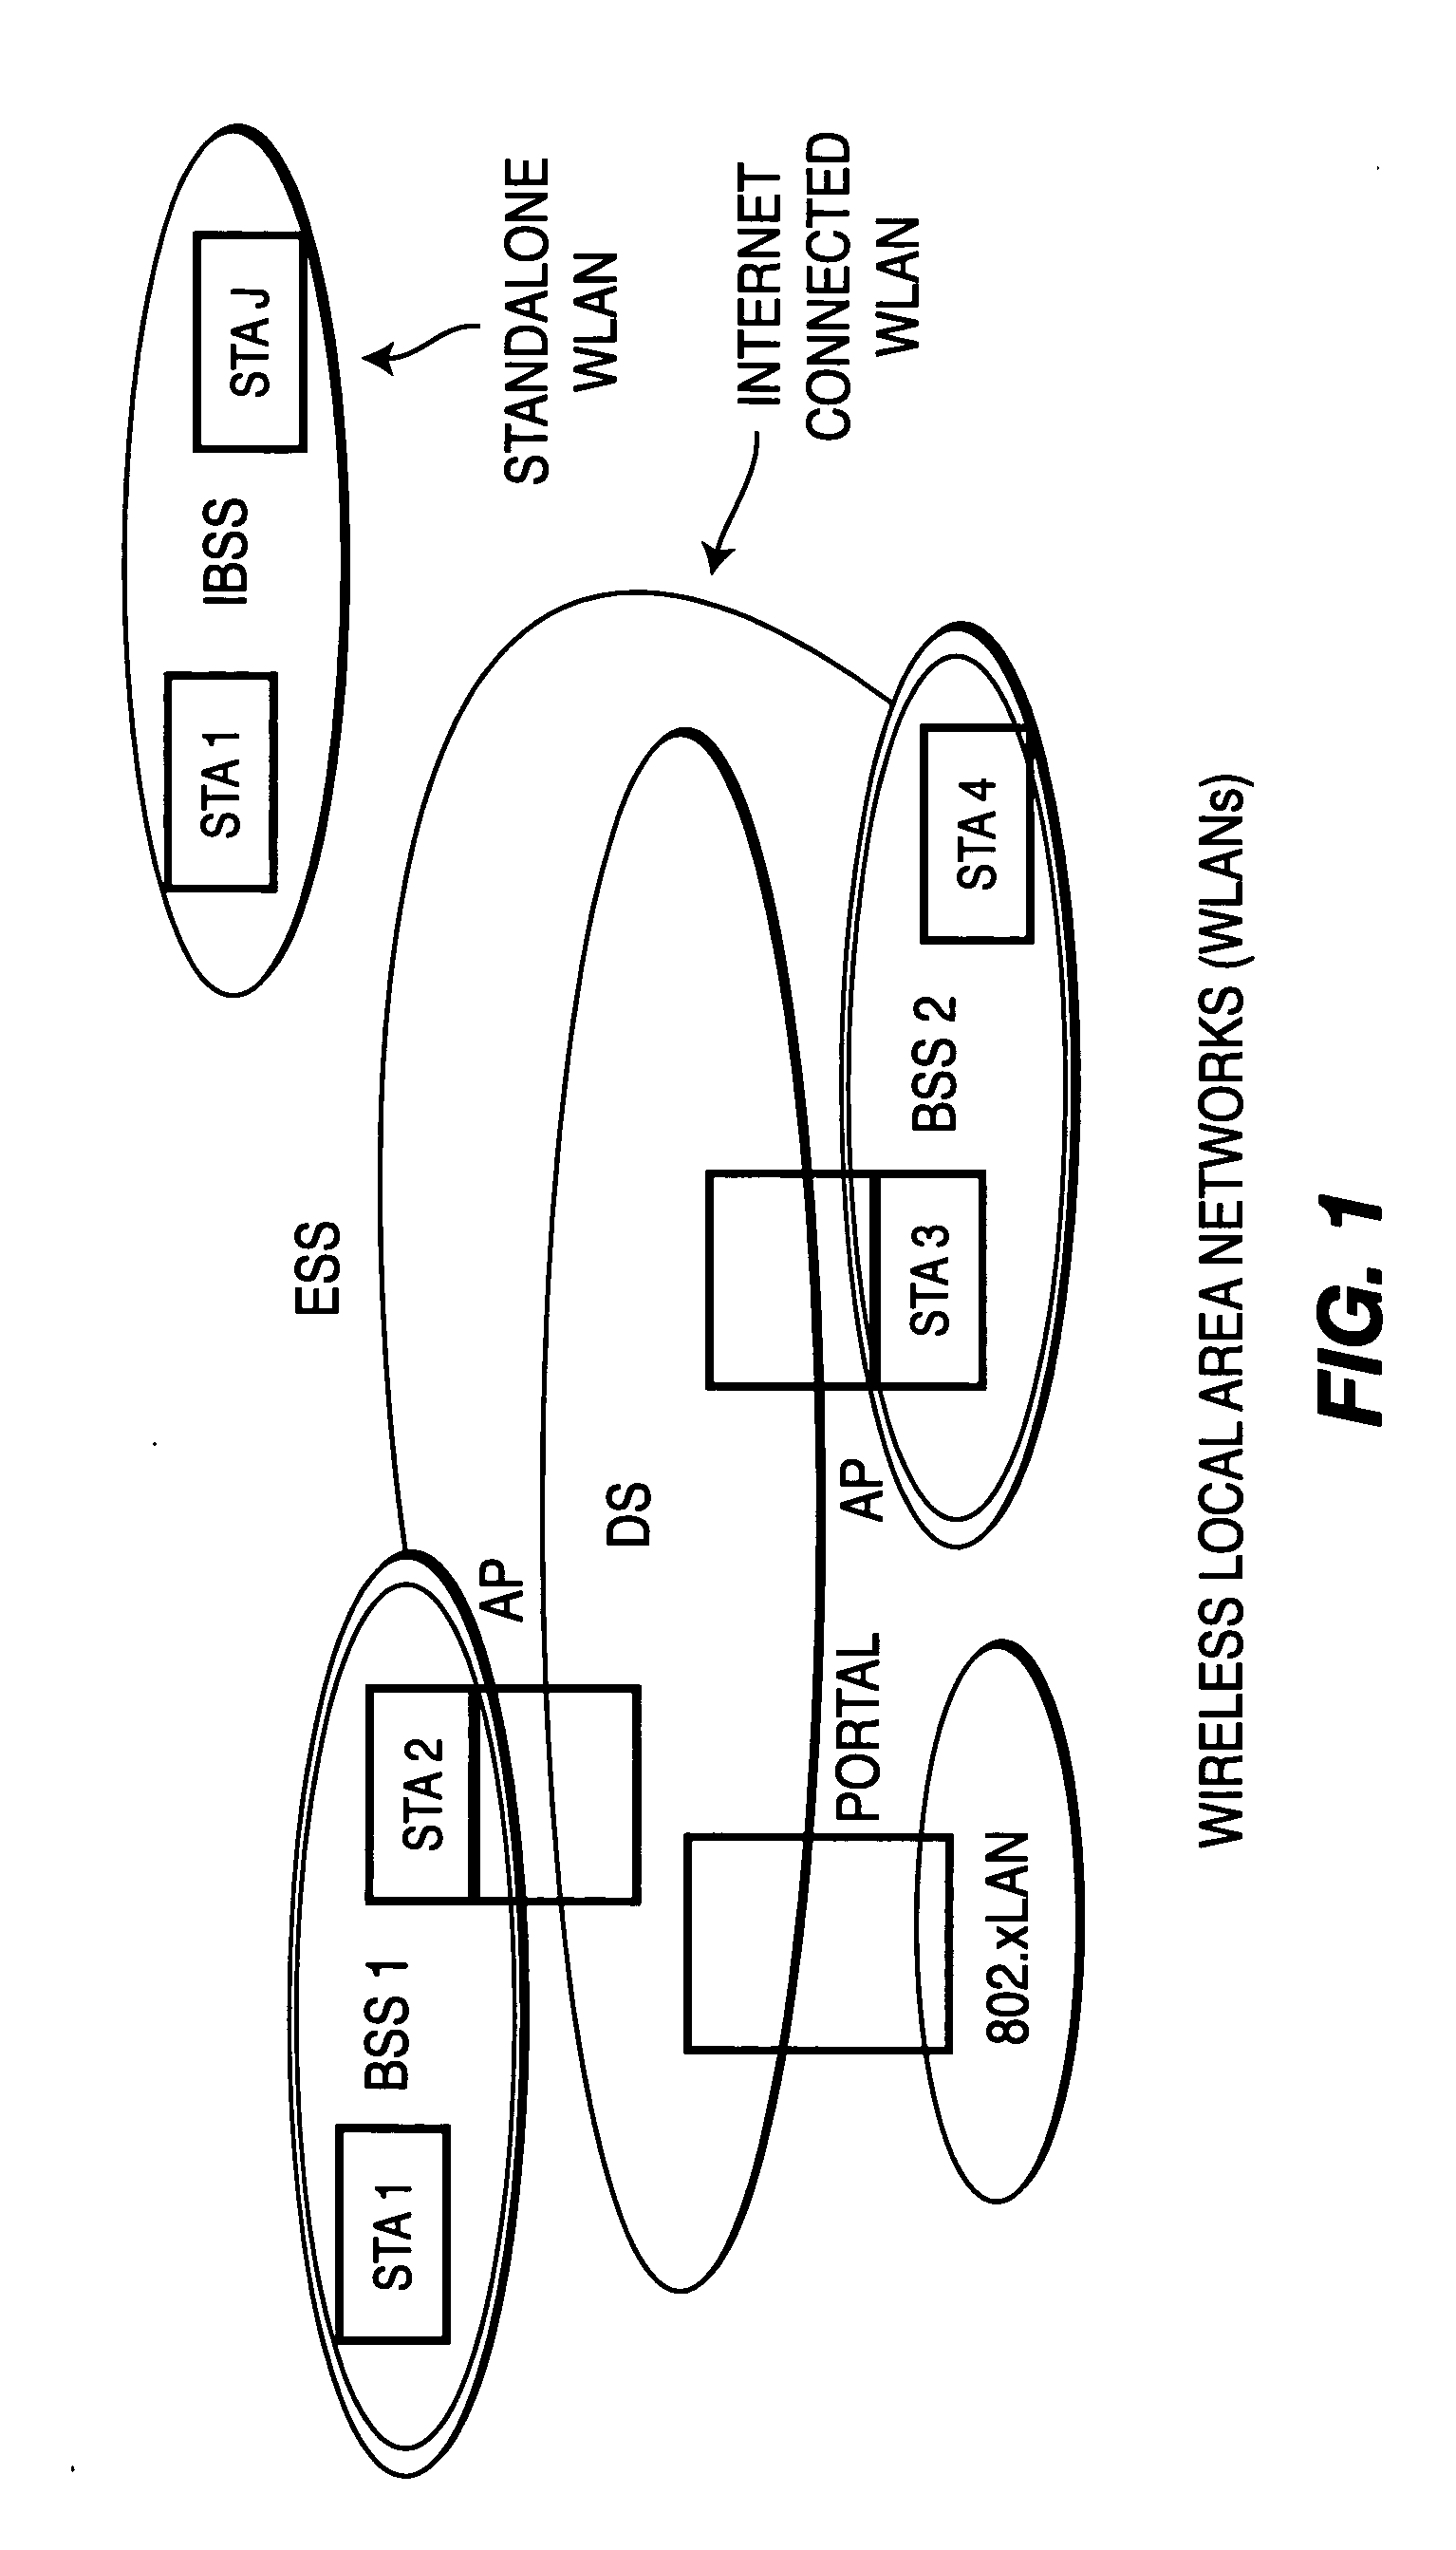 Method and apparatus for determining and managing congestion in a wireless communications system